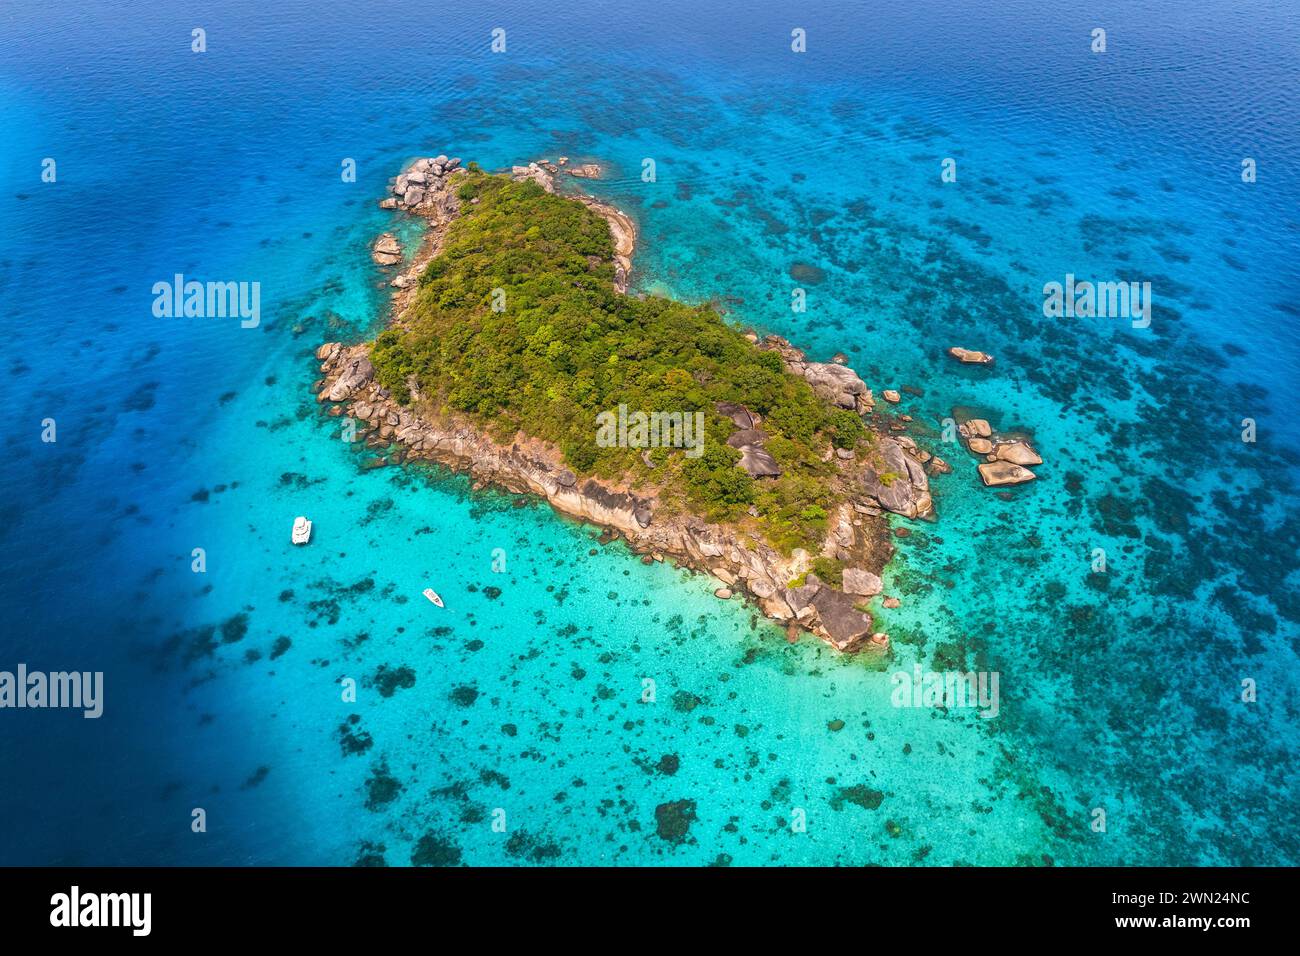 Aerial view of Similan Island in the Andaman Sea, Thailand Stock Photo